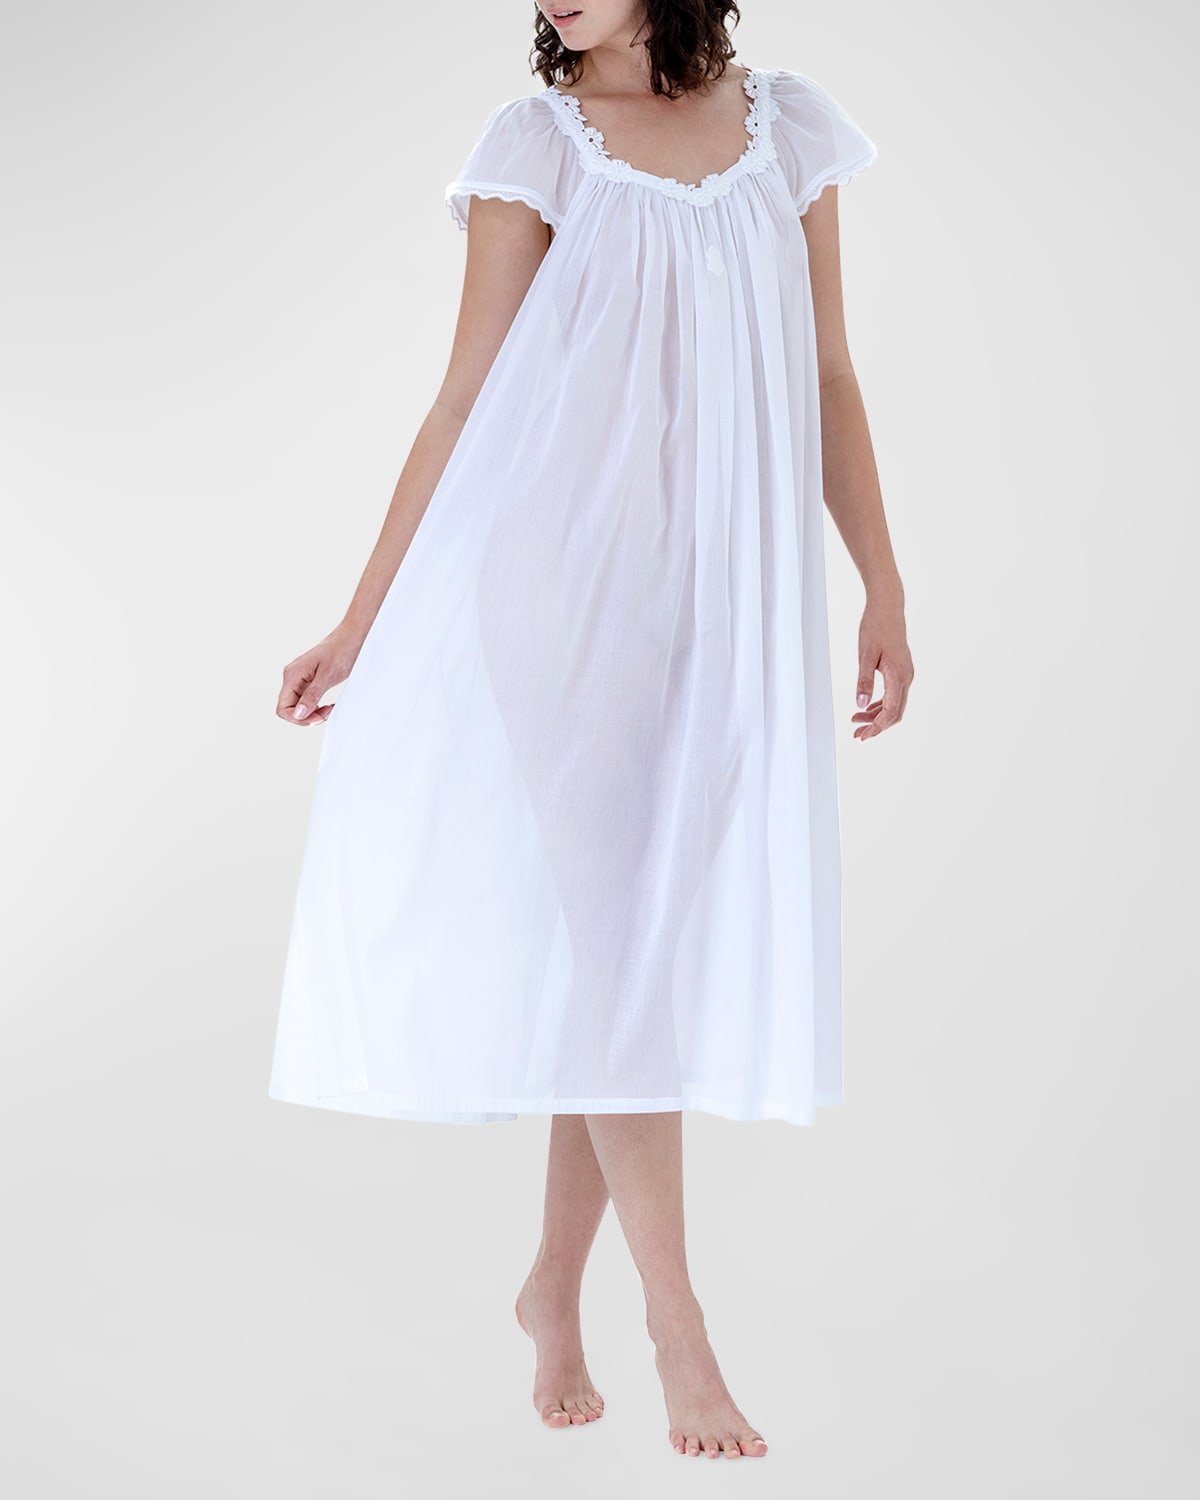 Coralie-2 Ruched Lace-Trim Cotton Nightgown